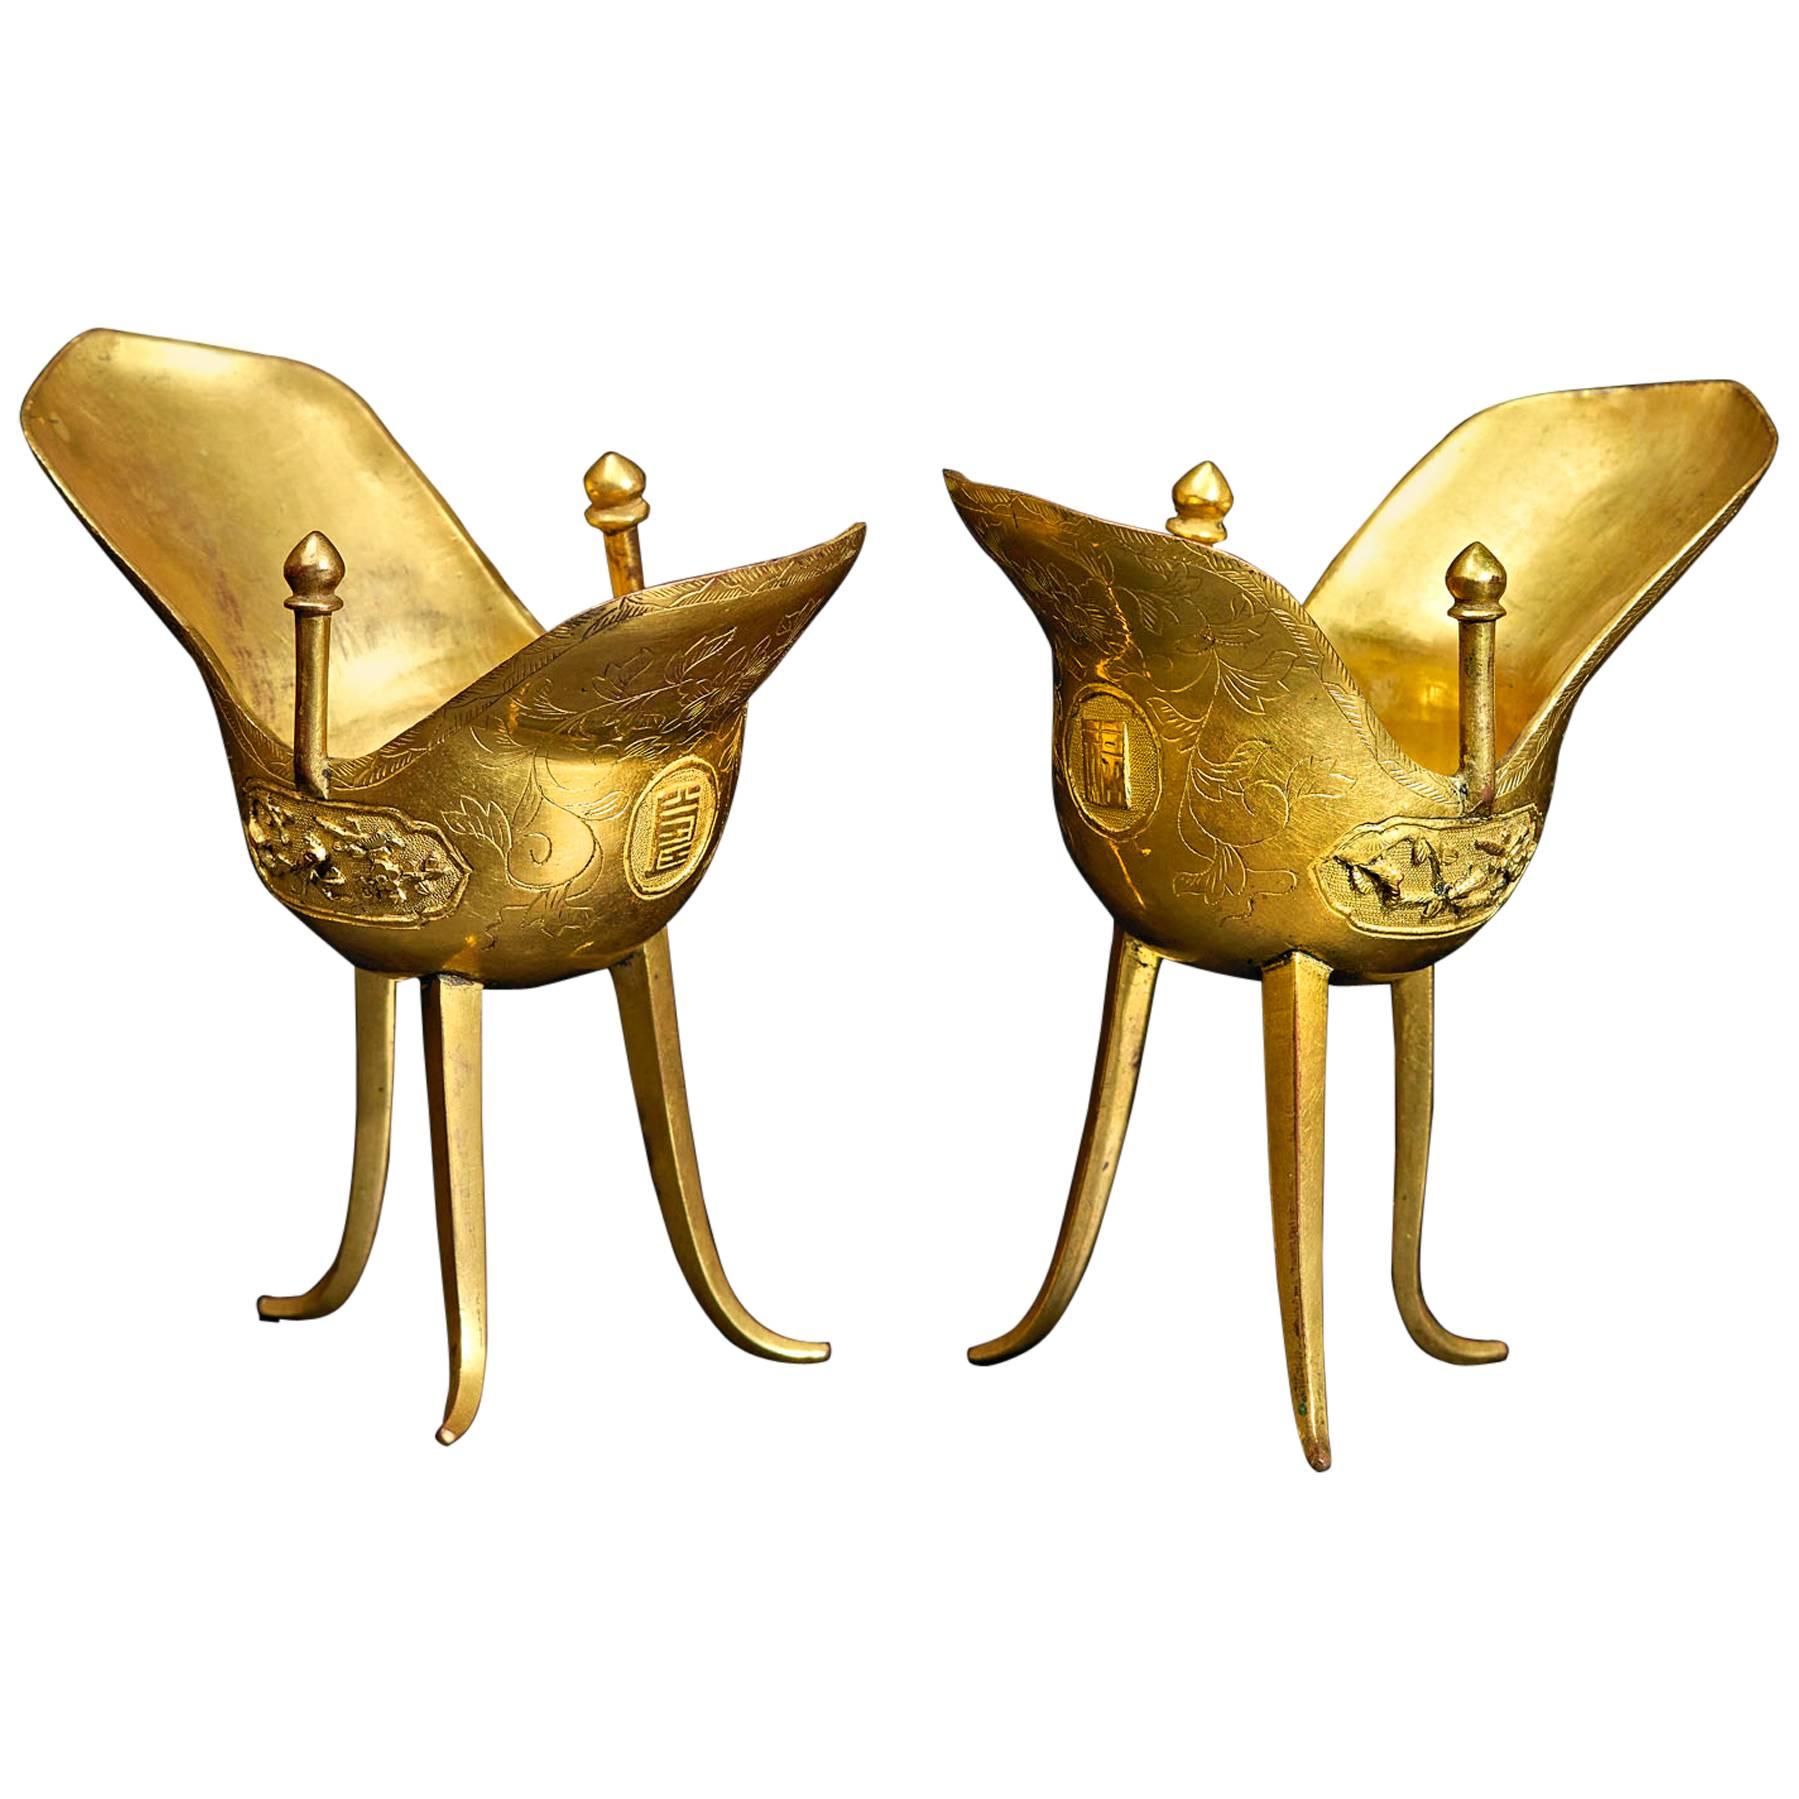 17th Century Extraordinary Pair of Small Archaistic Gilt-Bronze Vessels, Jue For Sale